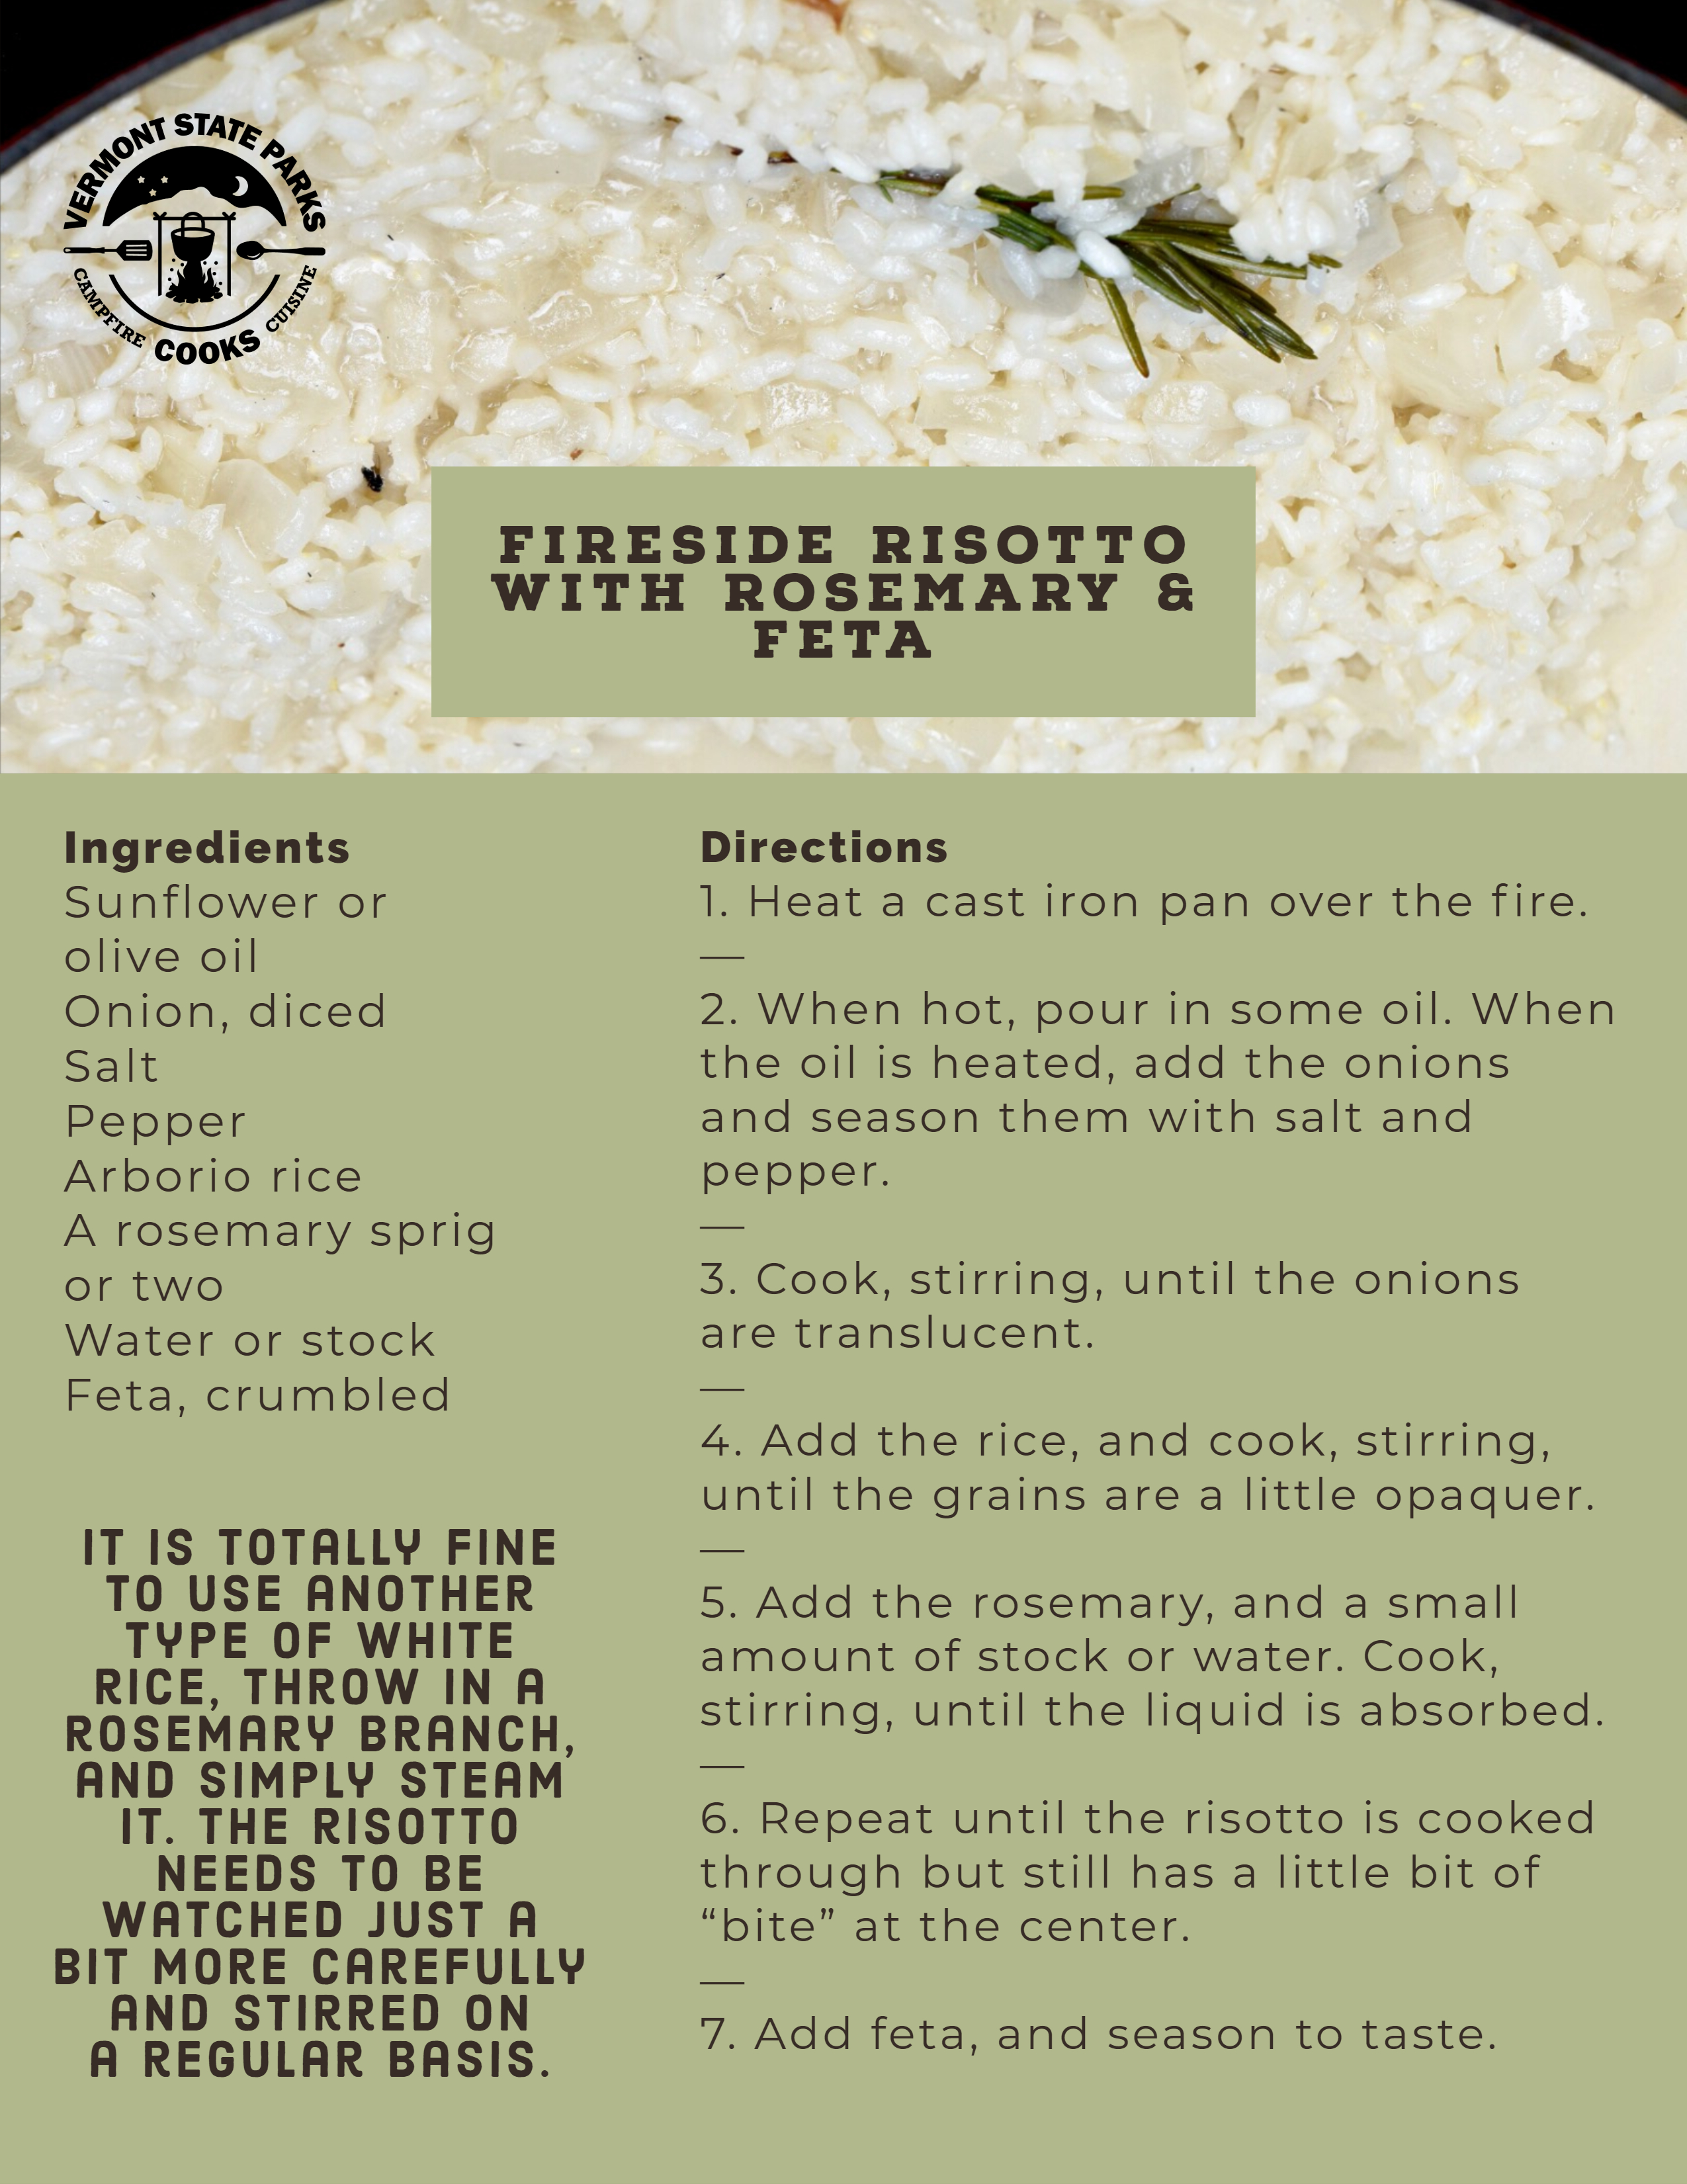 Fireside Risotto with Rosemary & Feta